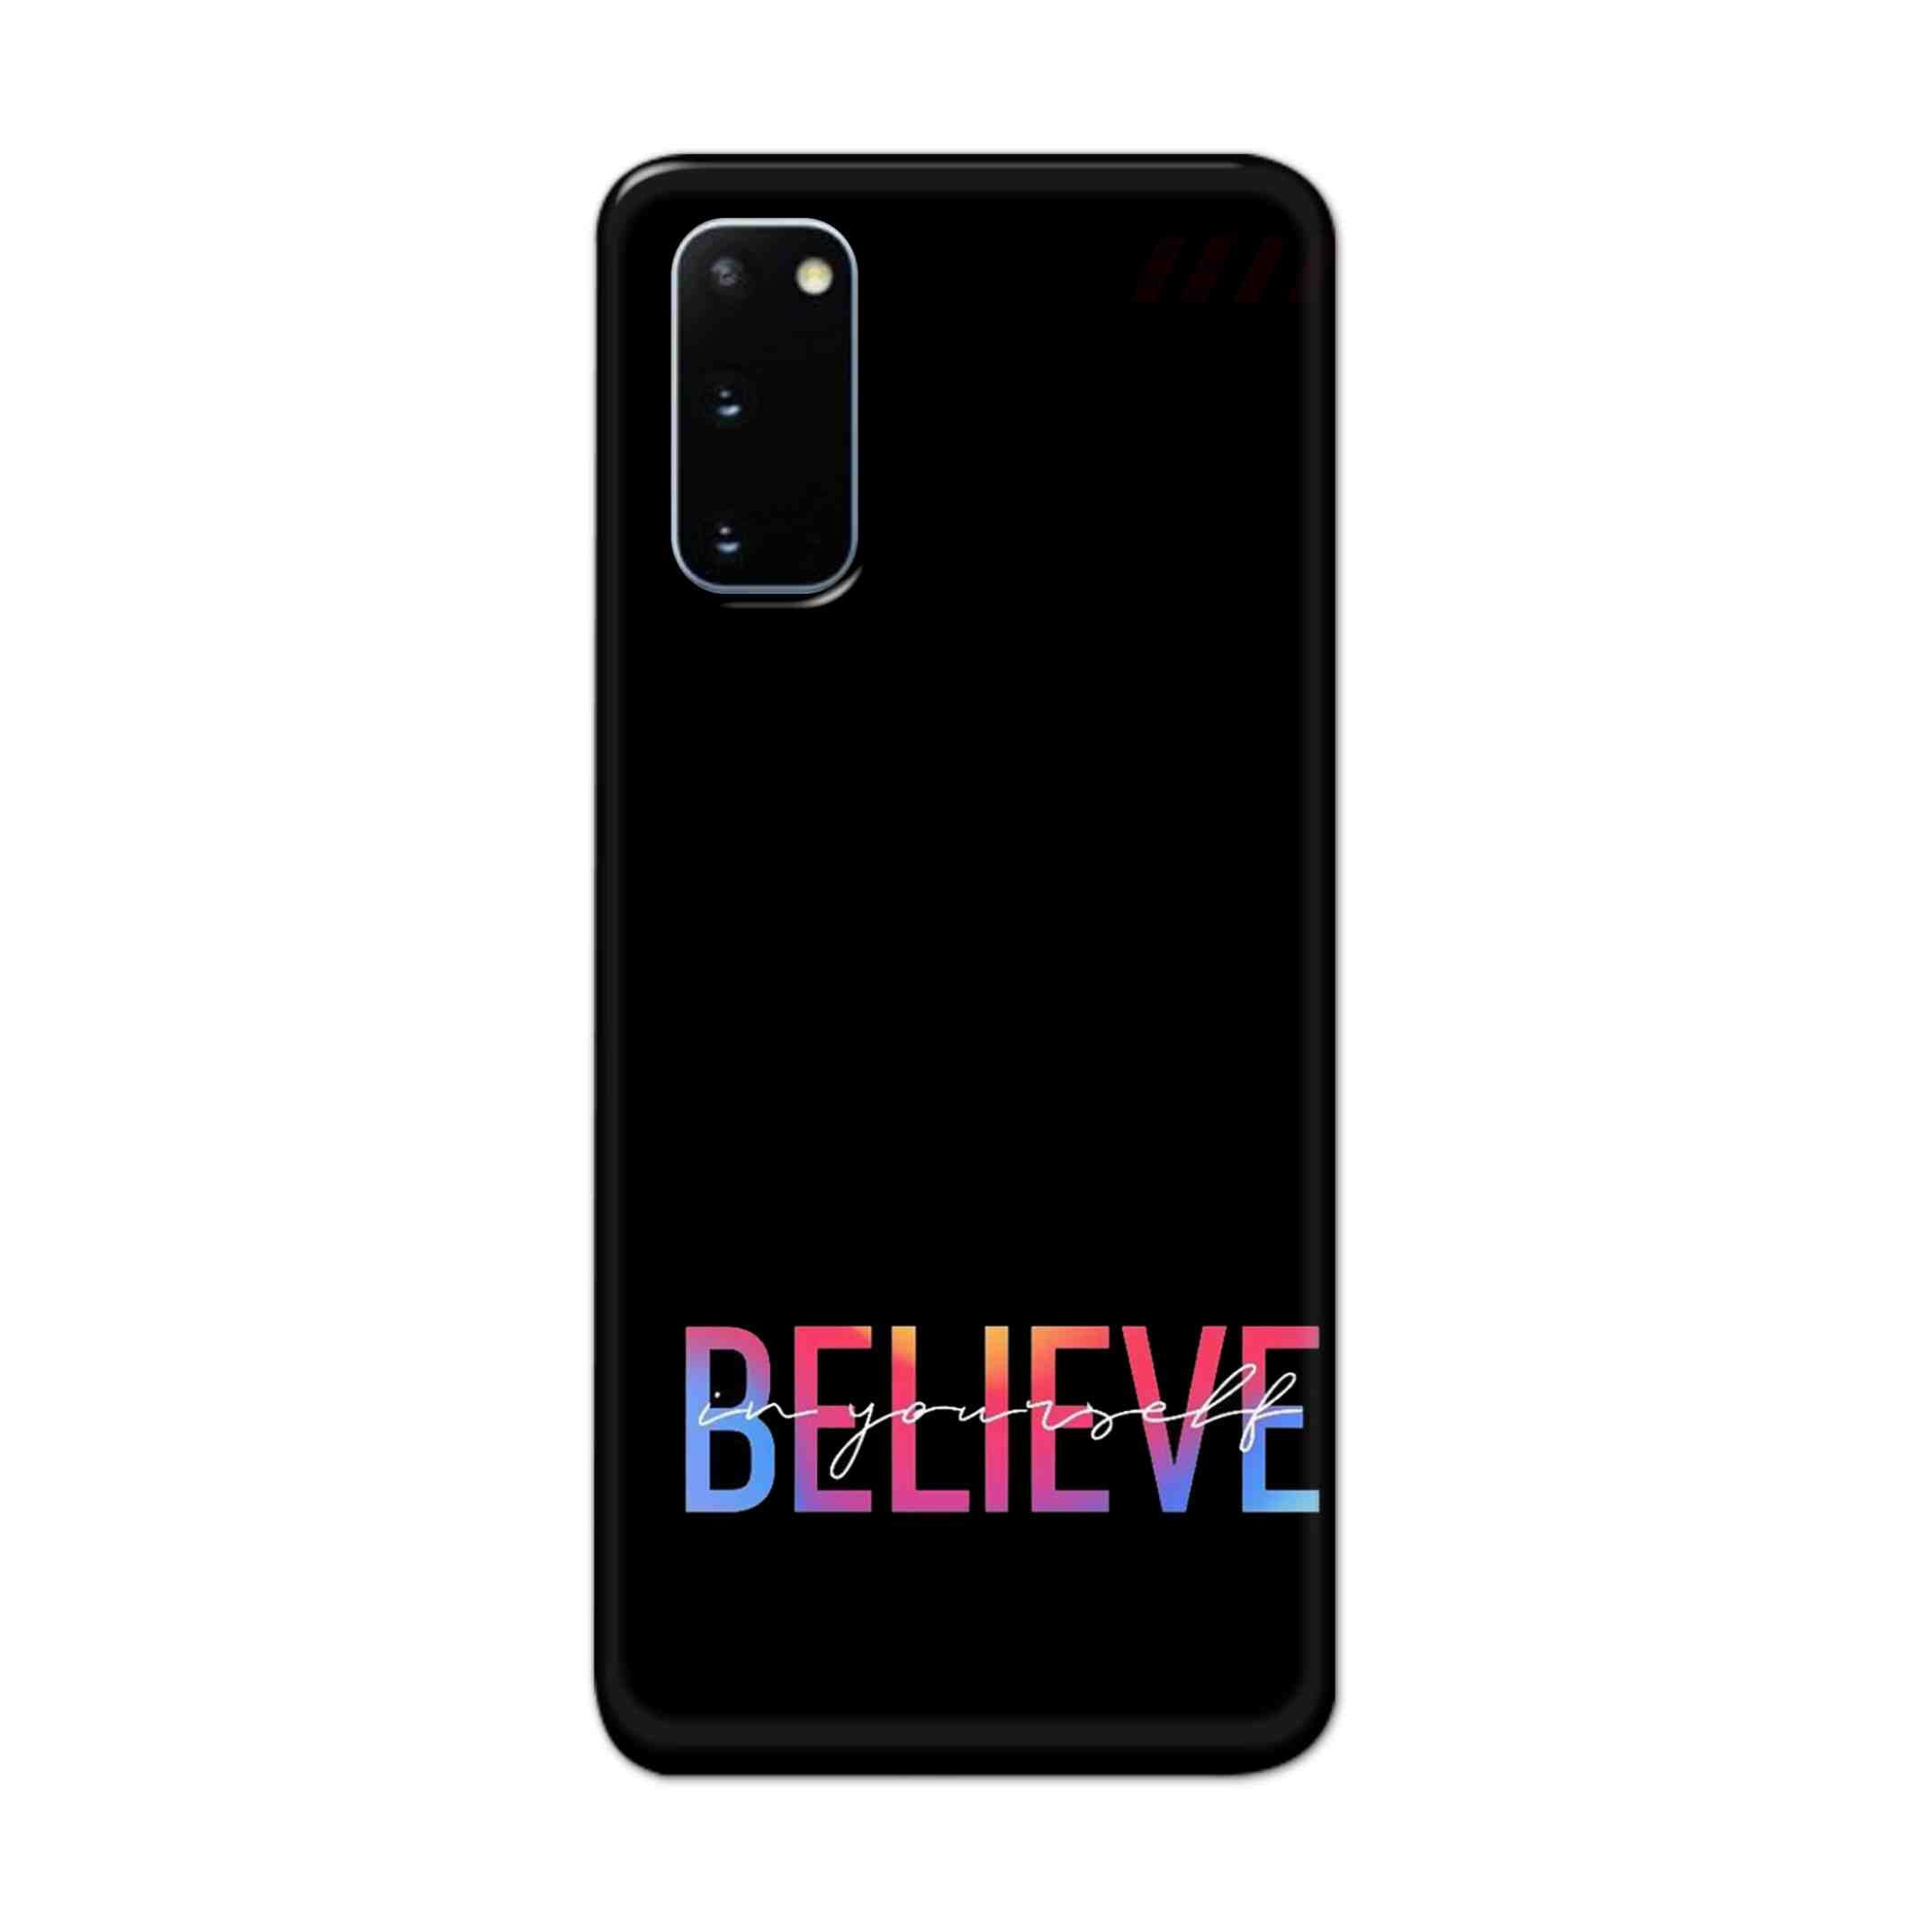 Buy Believe Hard Back Mobile Phone Case Cover For Samsung Galaxy S20 Online